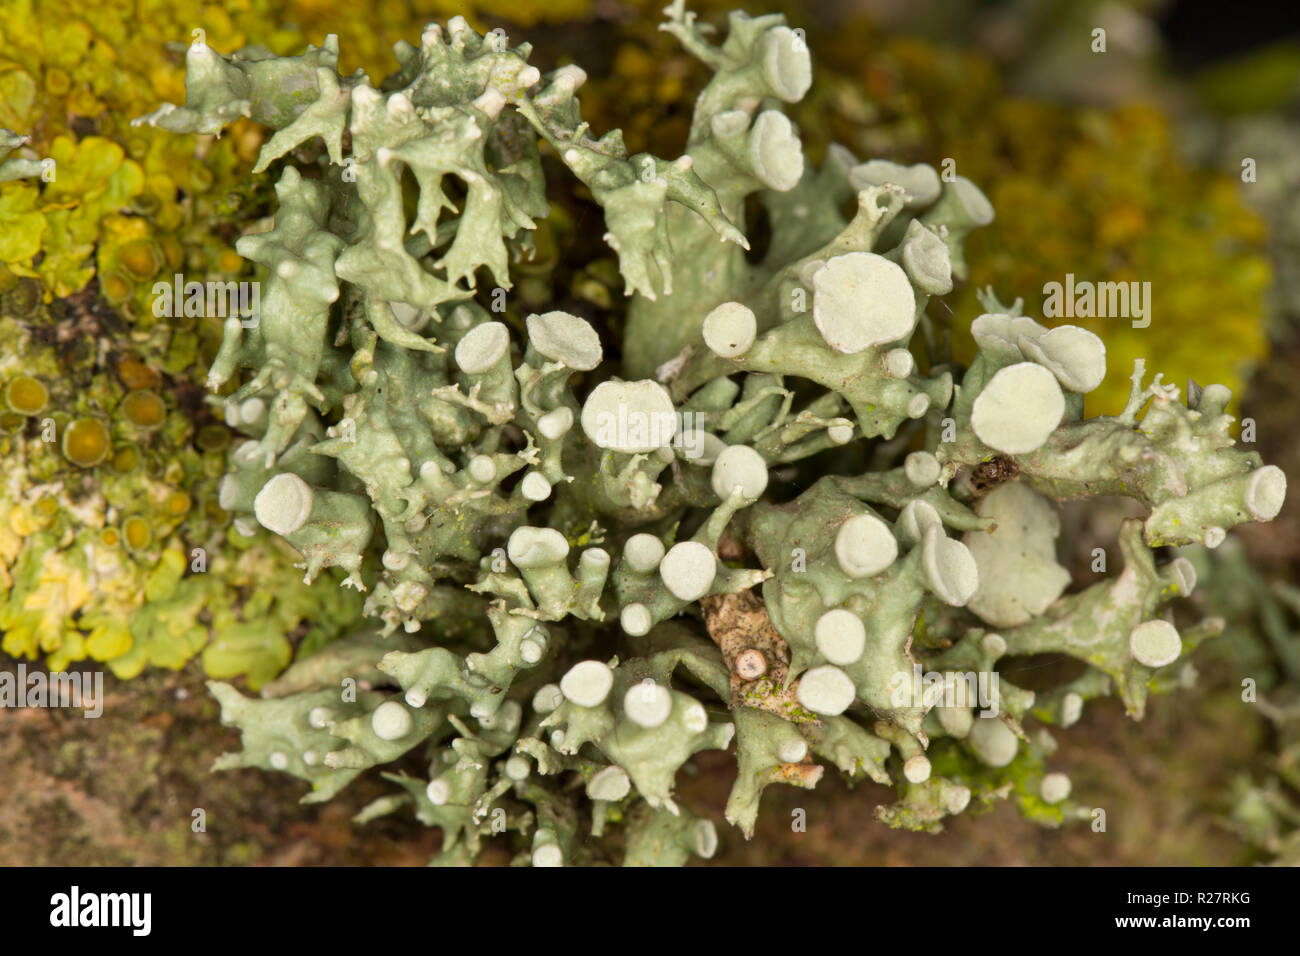 A lichen of the genus Ramalina growing on trees lining a public footpath. The lichen pictured matches the description for Ramalina fastigiata but this Stock Photo